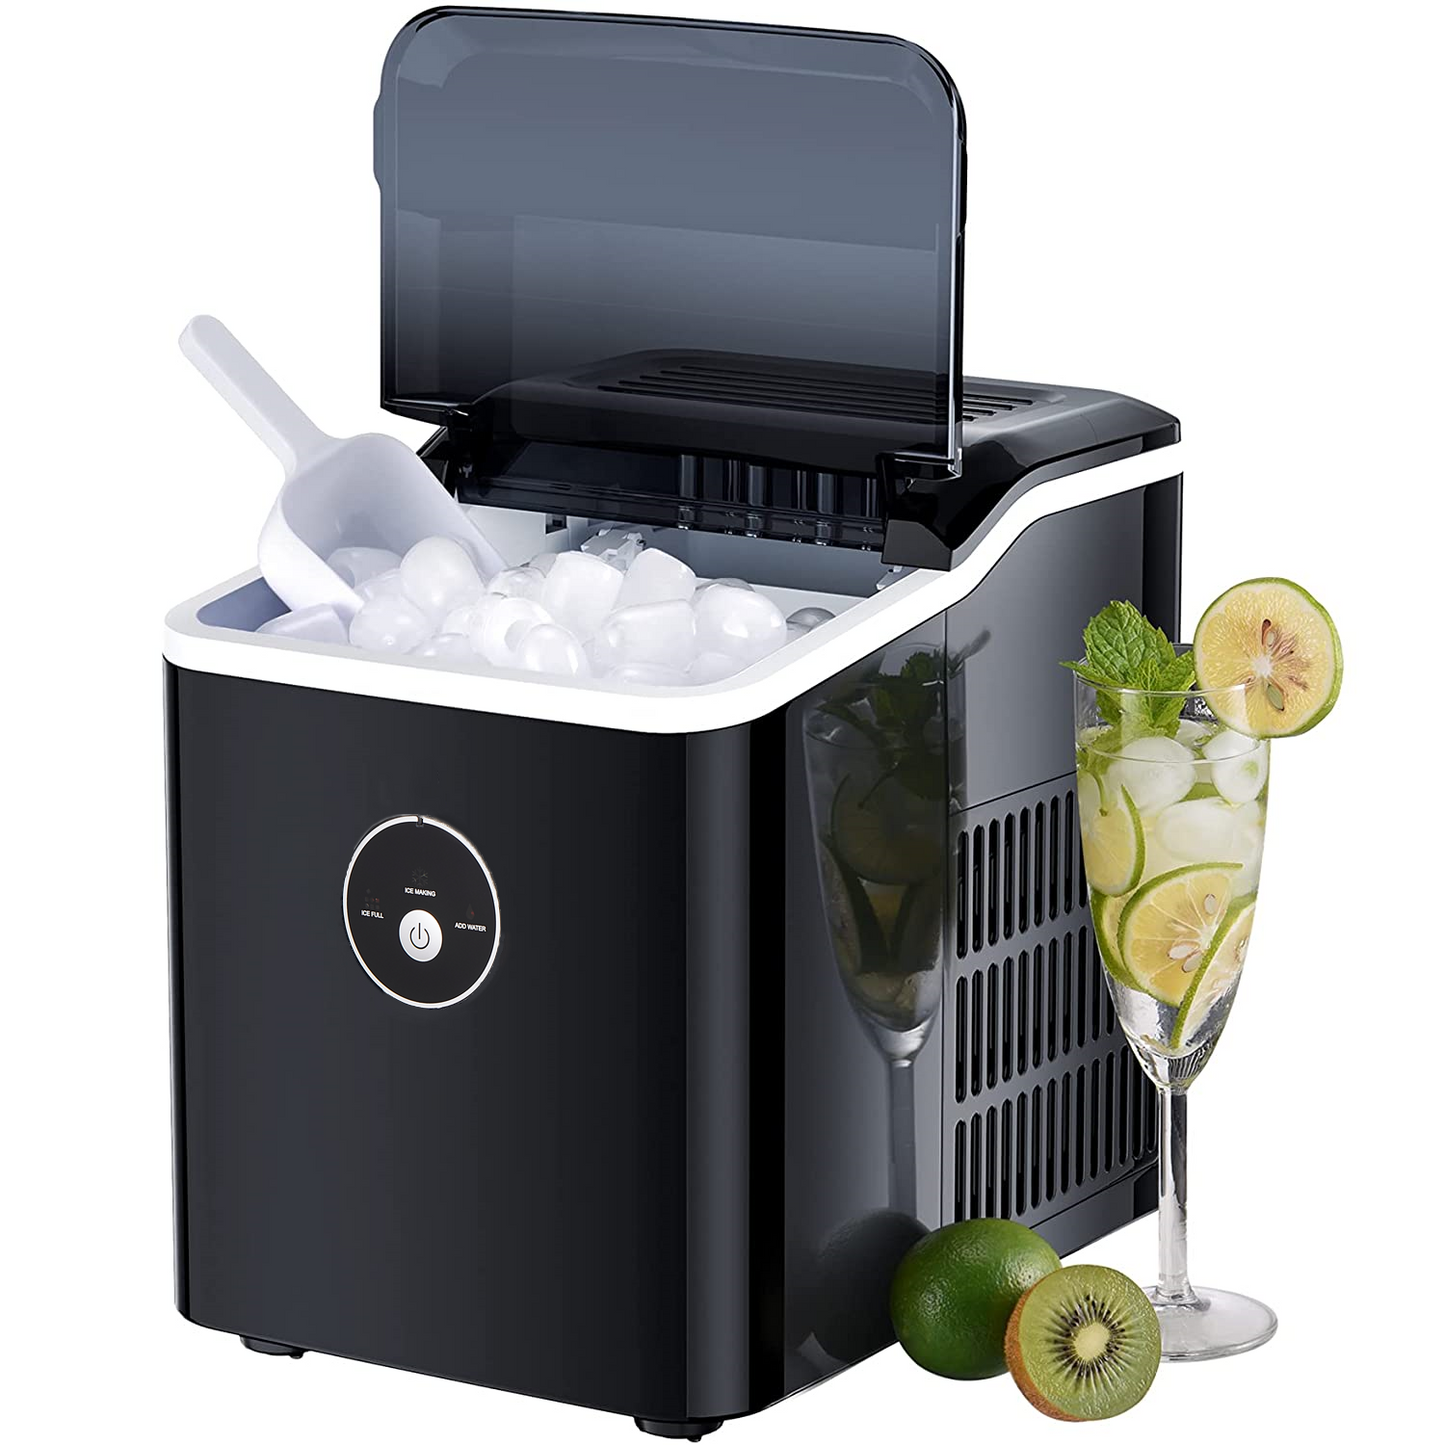 Ice Maker Countertop, 28 lbs. Ice in 24 Hrs, 9 Ice Cubes Ready in 5 Minutes, Portable Ice Maker Machine 2L with LED Display Perfect for Parties Mixed Drinks, Ice Scoop and Basket (Black)